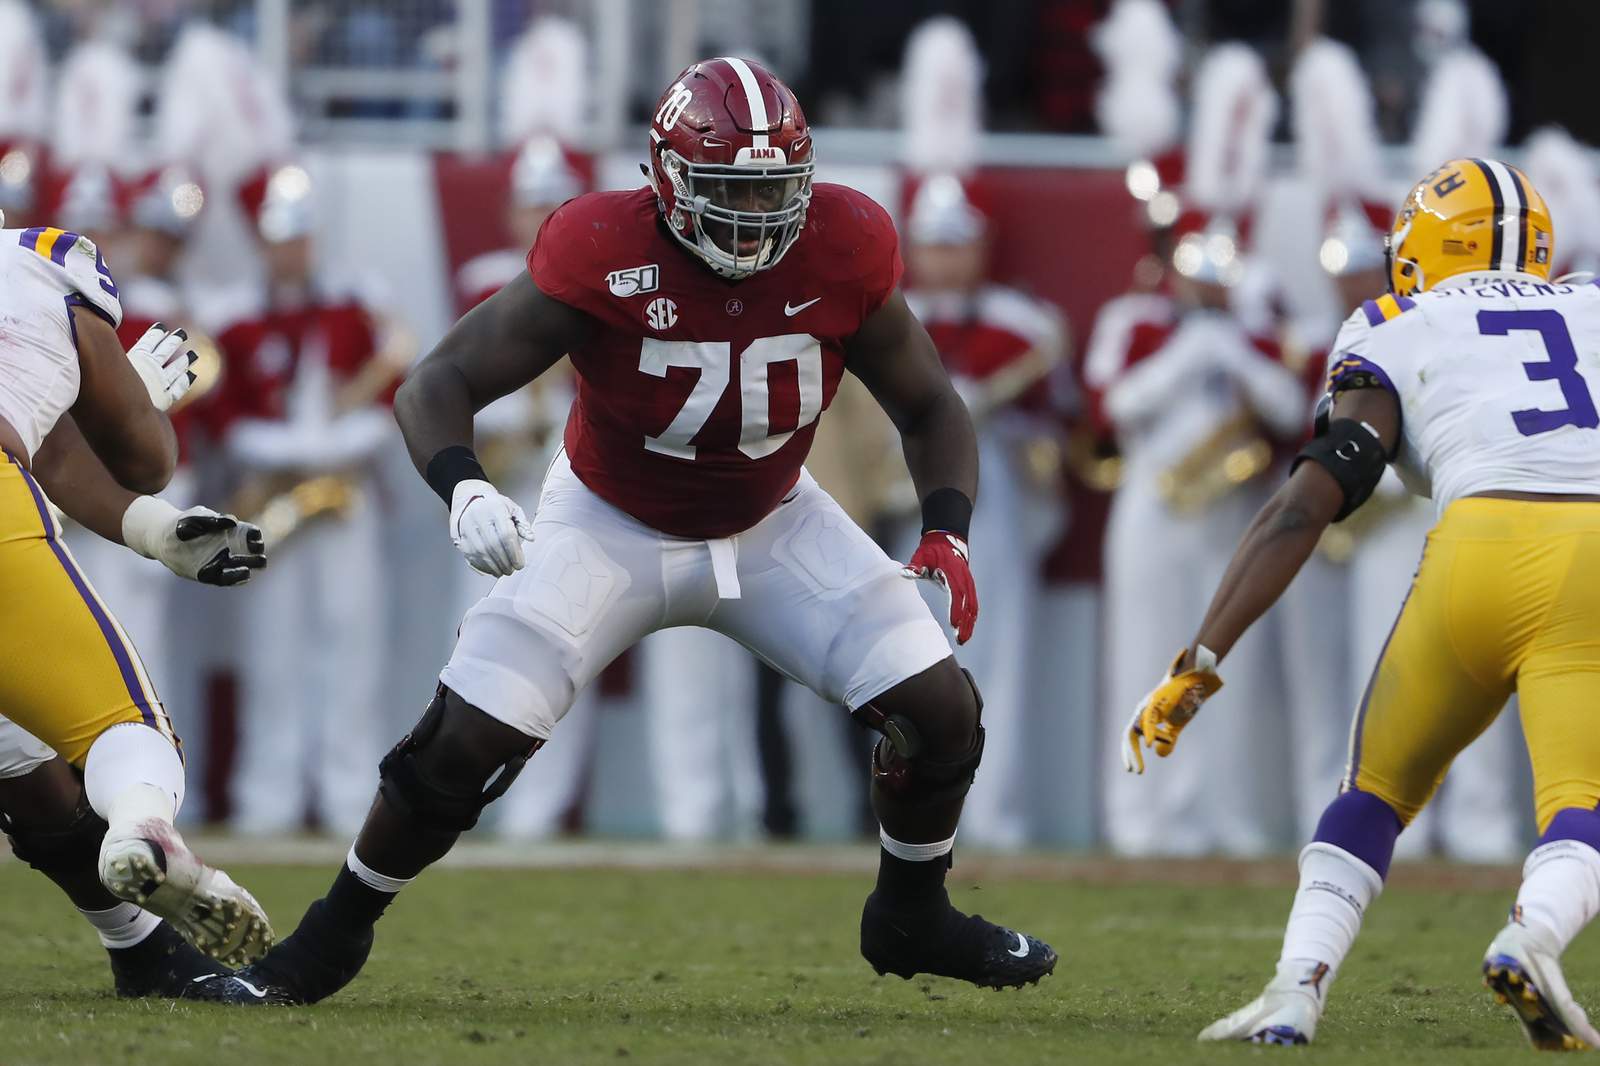 Roll redemption: No. 3 Alabama aims to restore dominance